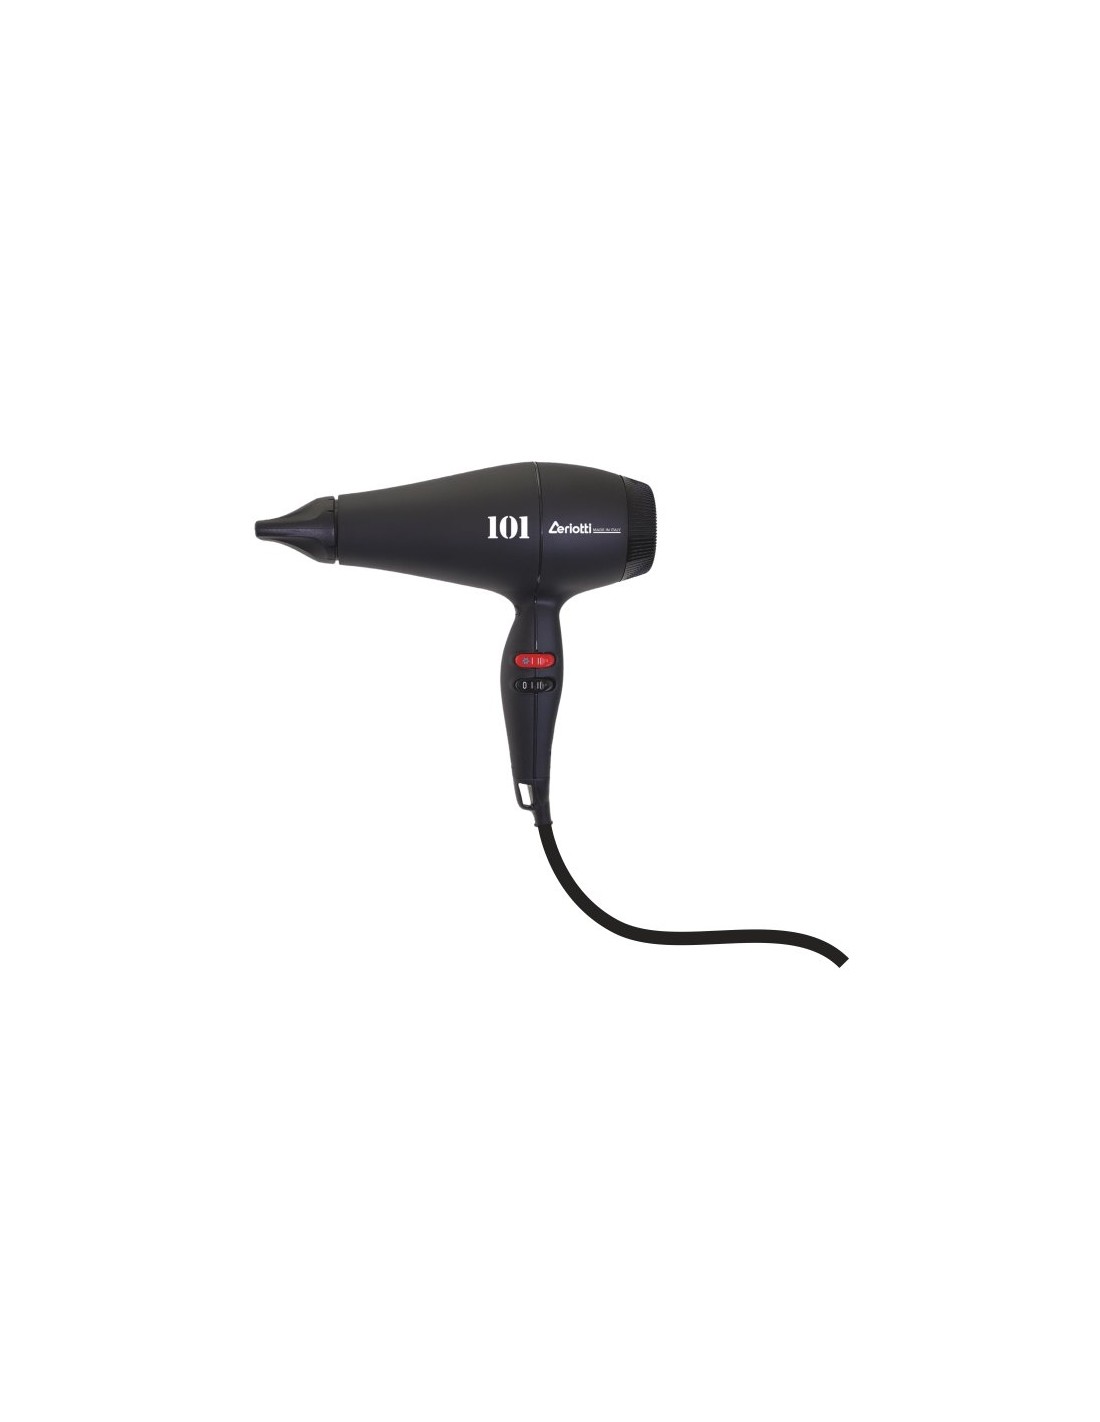 Hair dryer CERIOTTI 101, Made in Italy